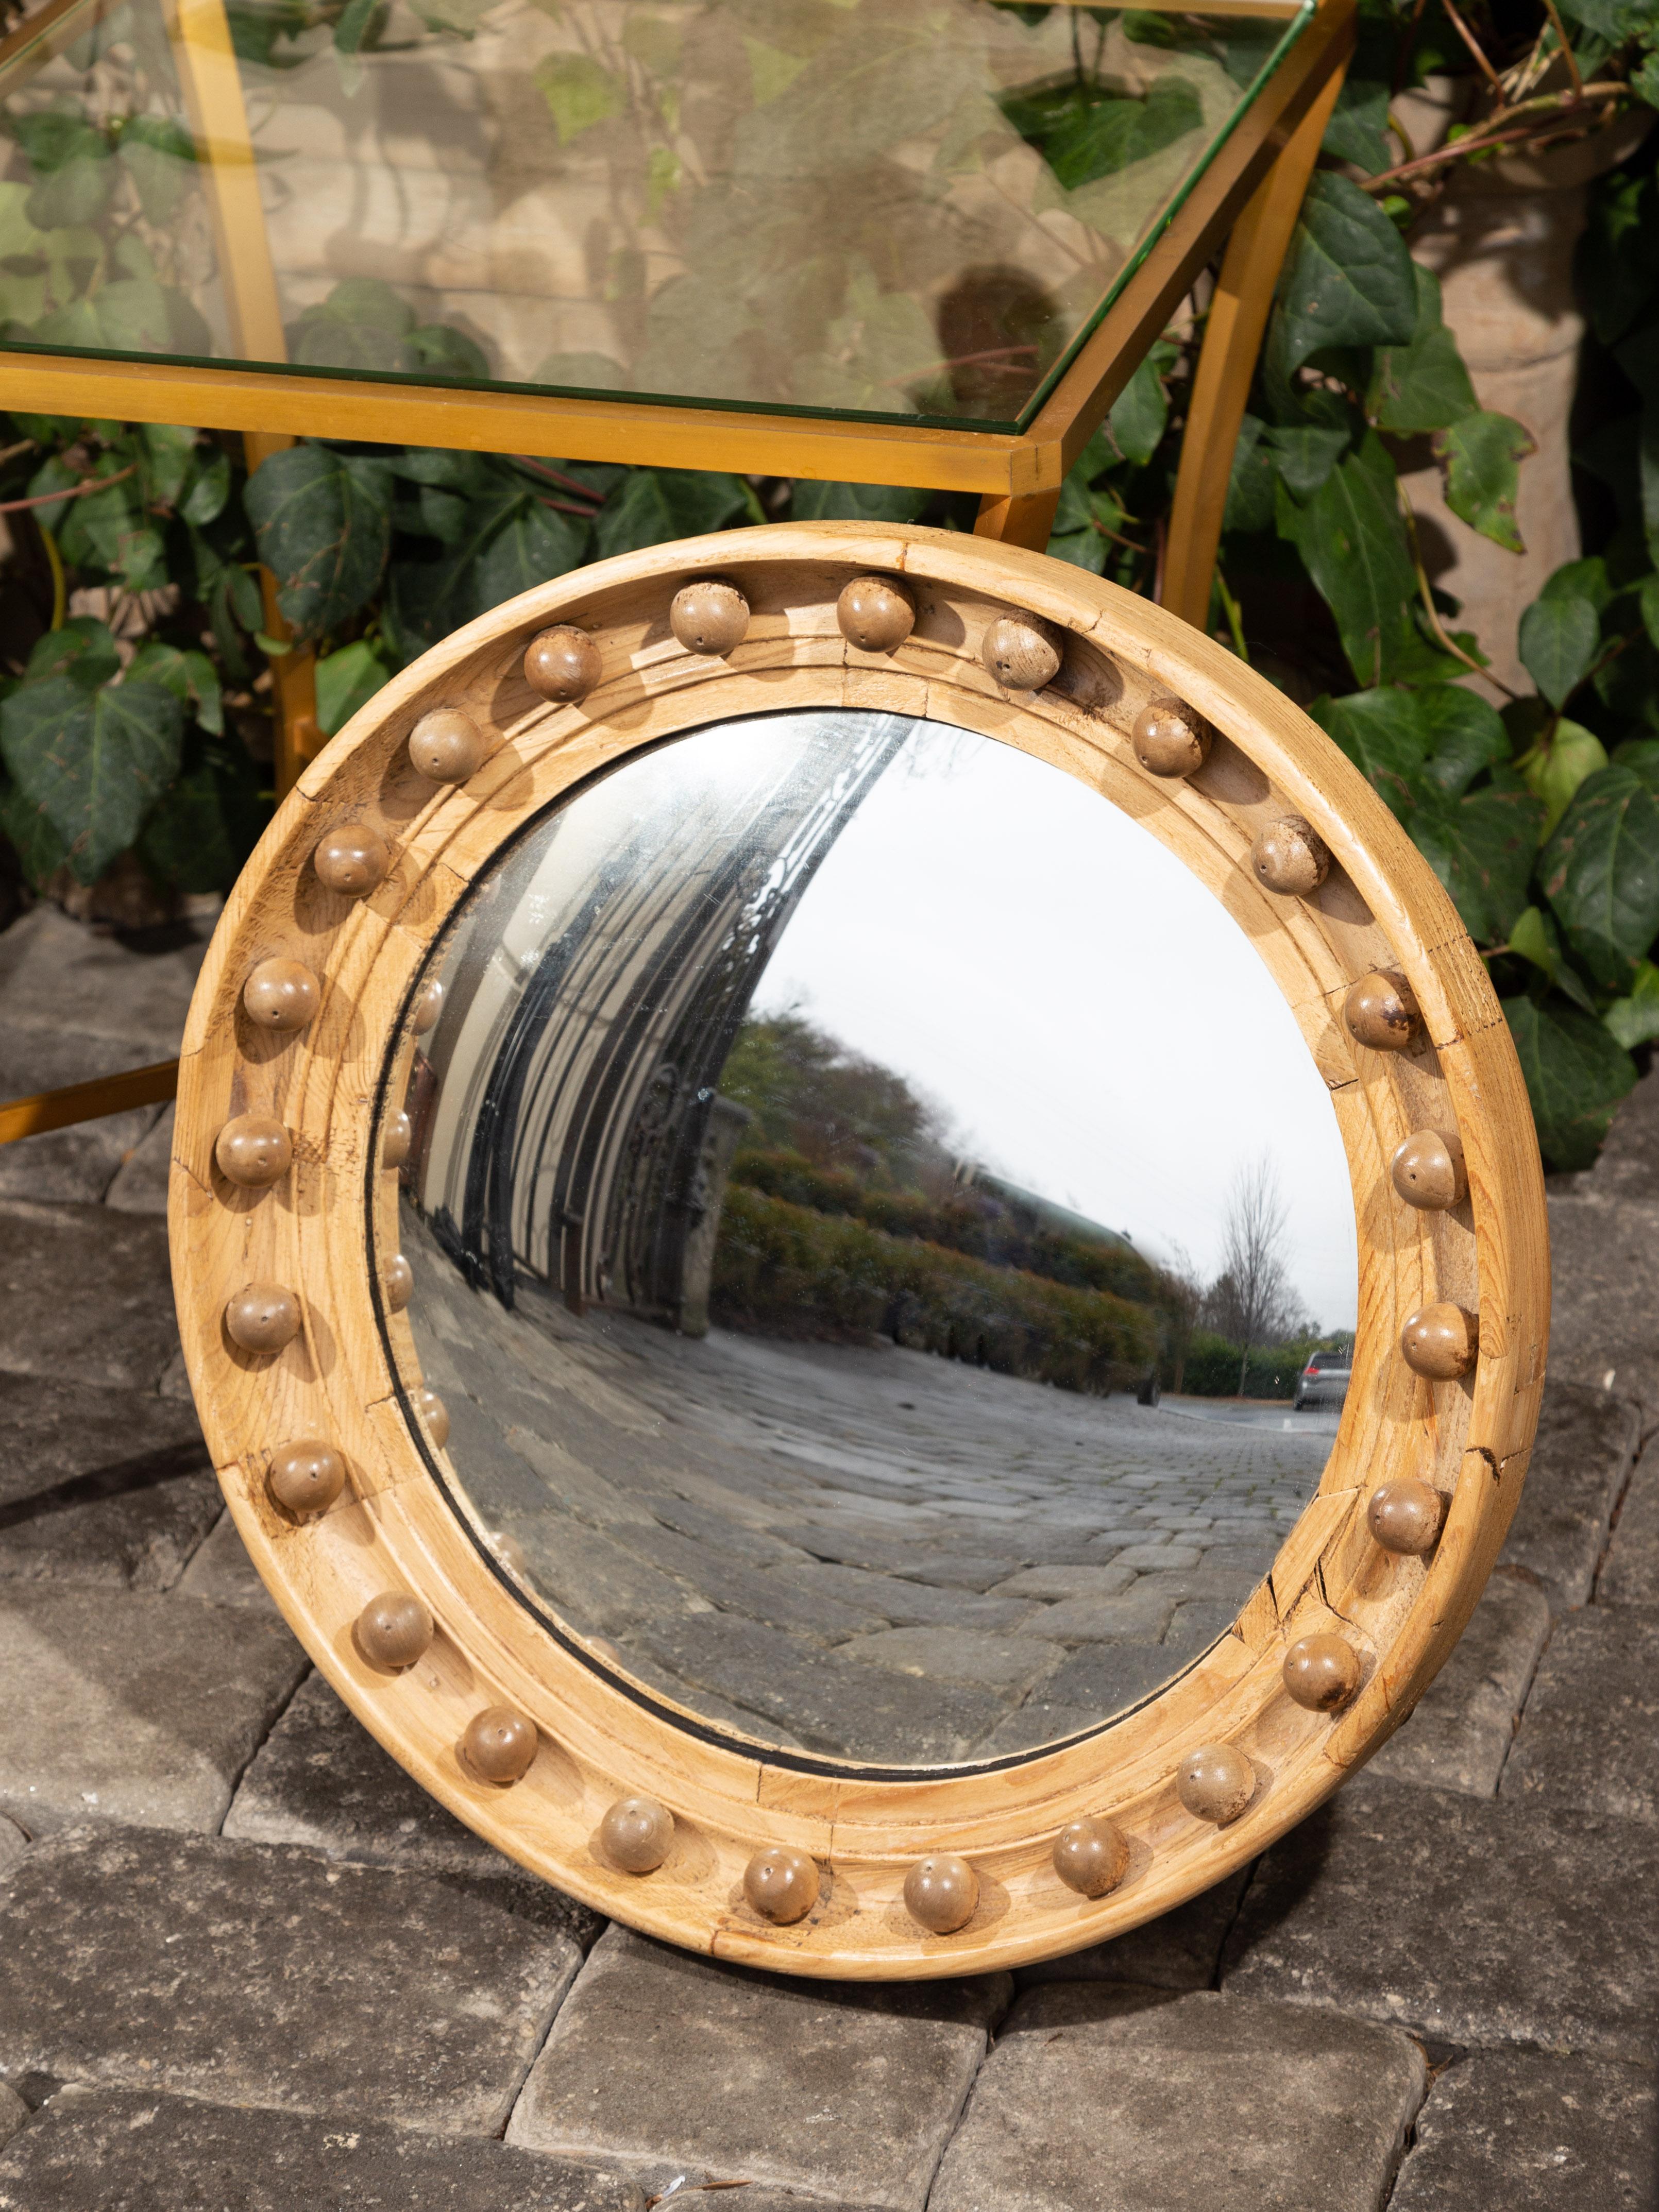 An English oak girandole bullseye convex mirror from the late 19th century with petite spheres and natural finish. Born in England during the last quarter of the 19th century, this bullseye mirror features a convex plate reflecting and distorting